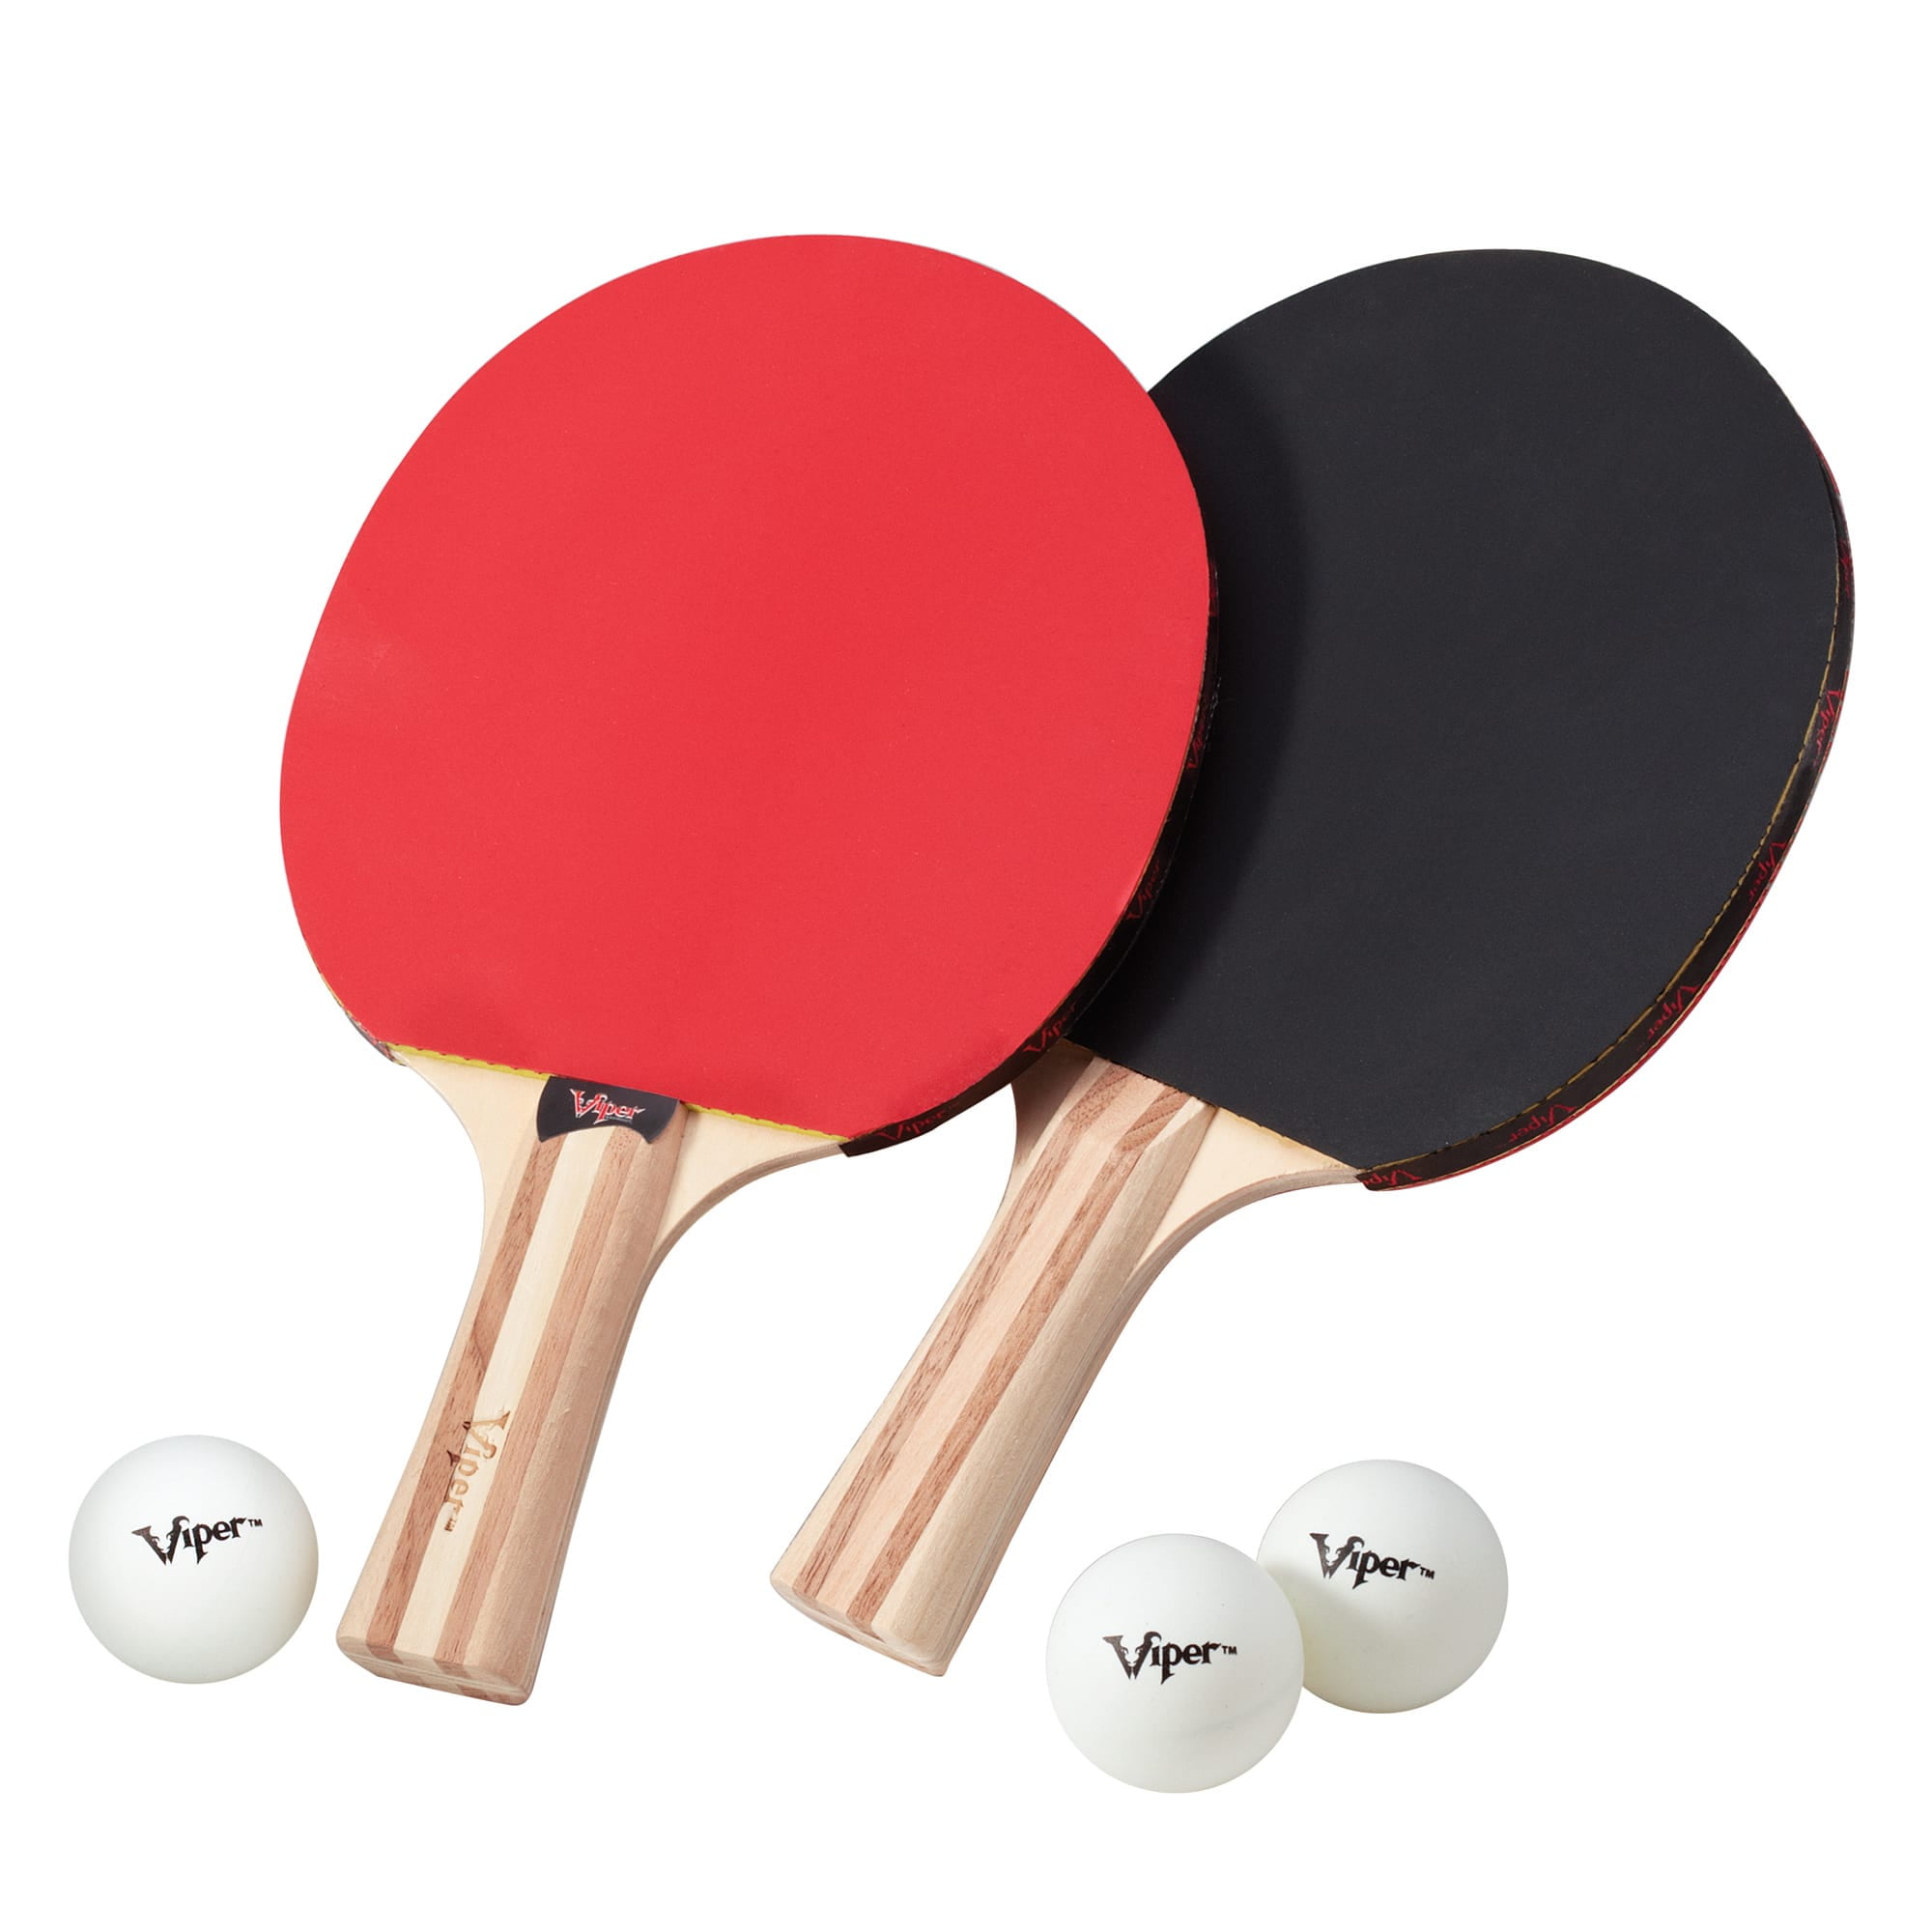 Details about   Ping Pong Paddle 2-Player Table Tennis Bat Racket w/ 3 Balls For Training Match